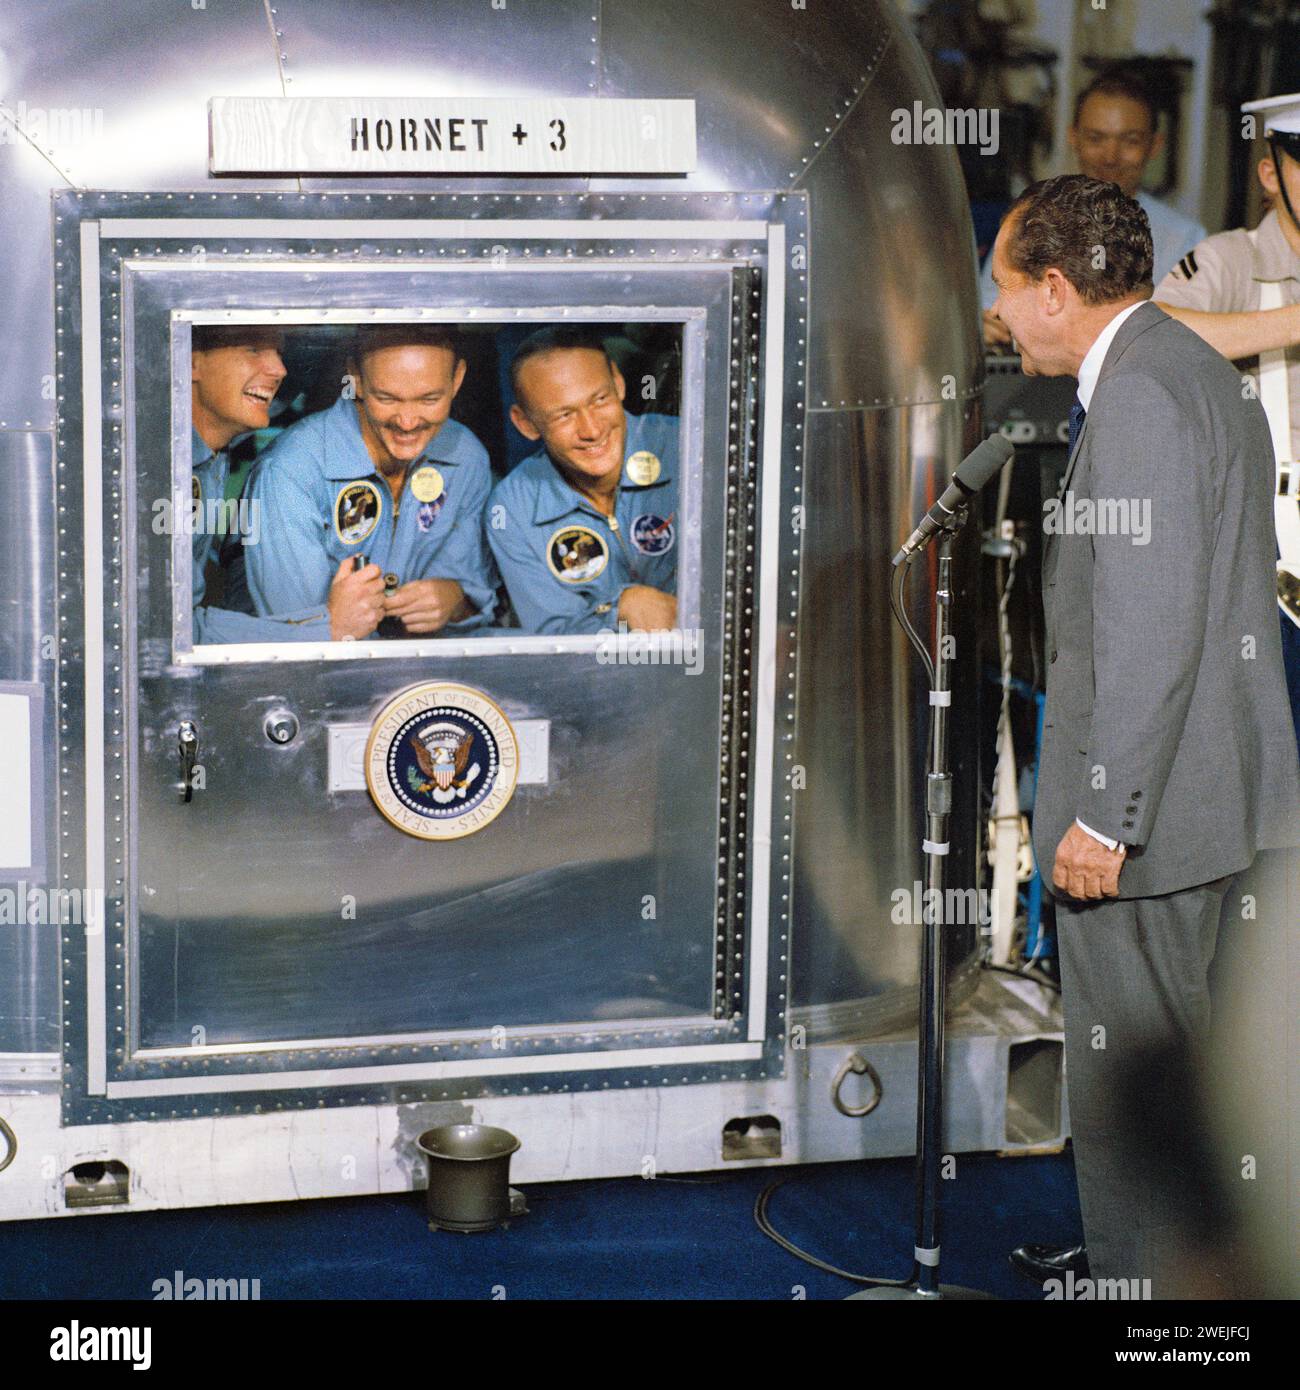 U.S. President Richard Nixon greeting Apollo 11 astronauts Neil A. Armstrong, Edwin E. Aldrin and Michael Collins, inside quarantine facility after successful recovery mission, USS Hornet, NASA, July 24, 1969 Stock Photo